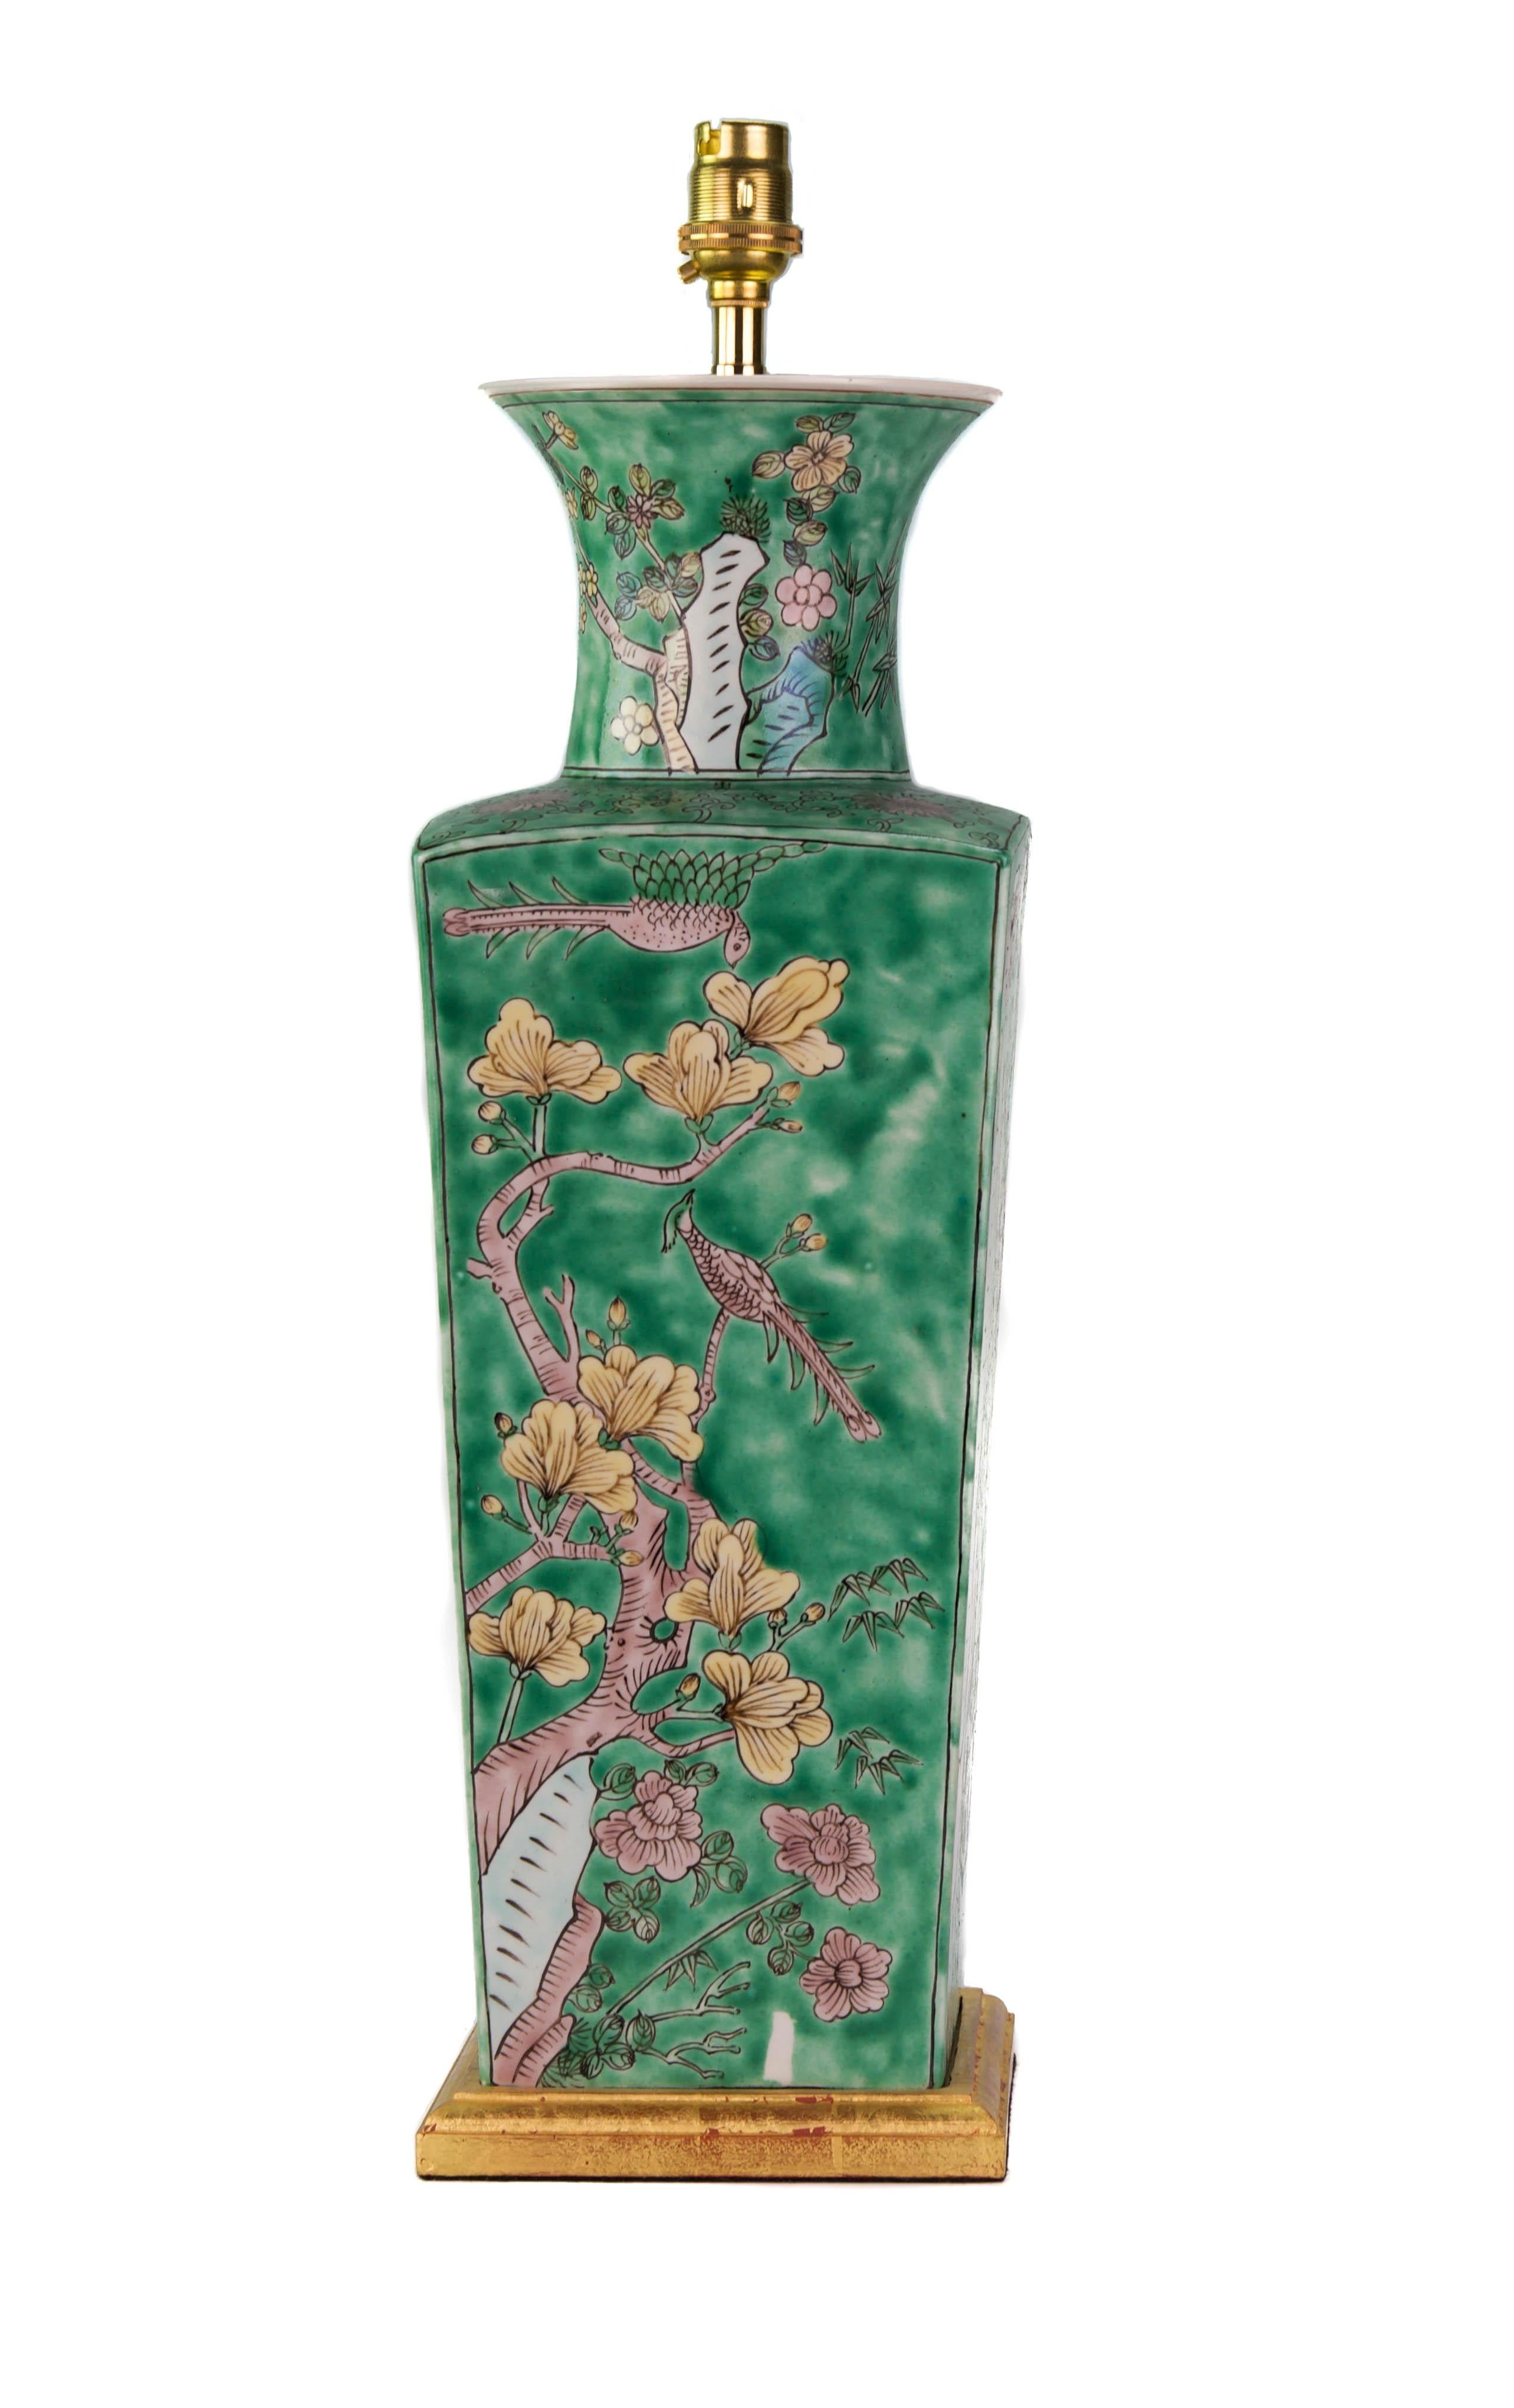 A fine 19th century French Samson of Paris vase decorated in the Kangxi style, finely painted throughout with blossoms and butterflies on a green ground, now mounted as a lamp with a hand-gilded turned base.

Measures: Height of vase 16 1/8 in (41